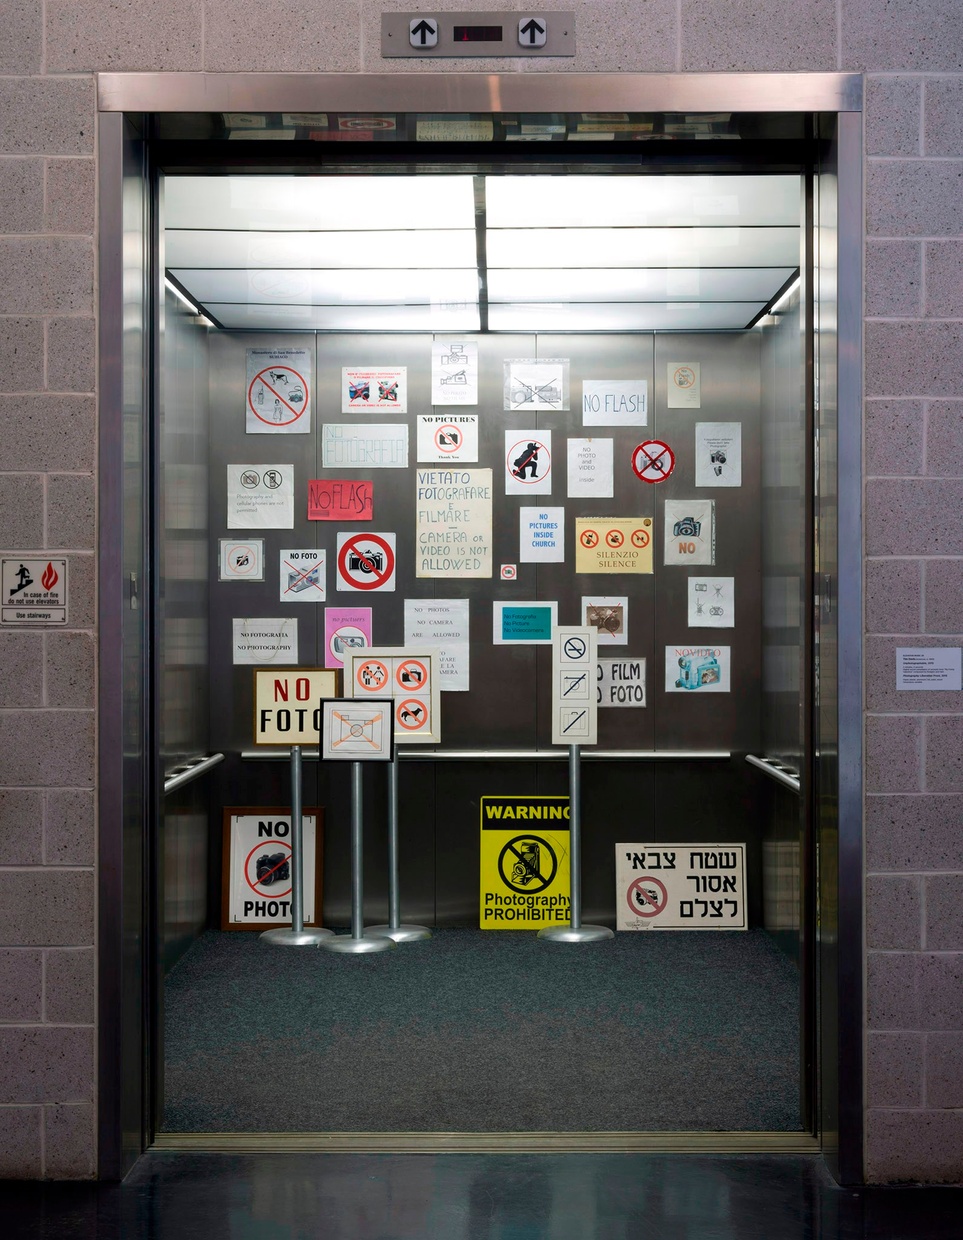 The inside of a metal elevator with numerous posters banning photography in different languages scattered along the walls.